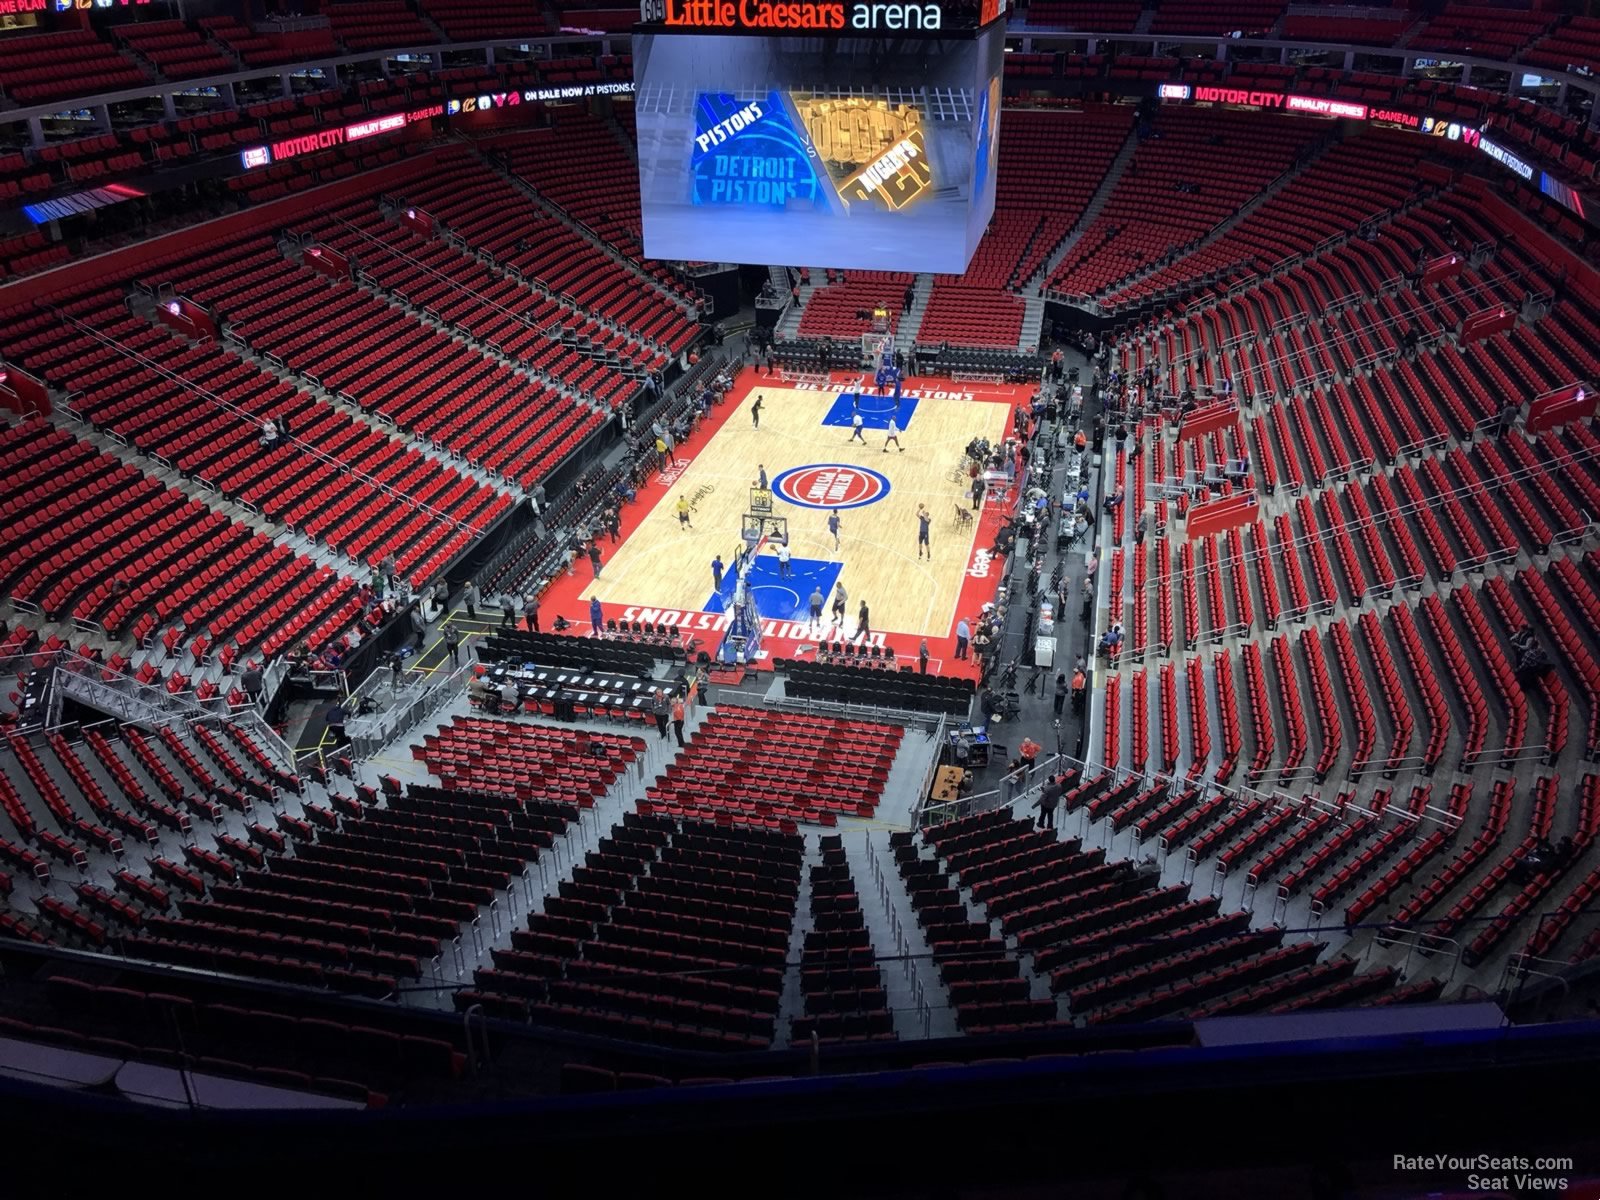 section 202, row 4 seat view  for basketball - little caesars arena